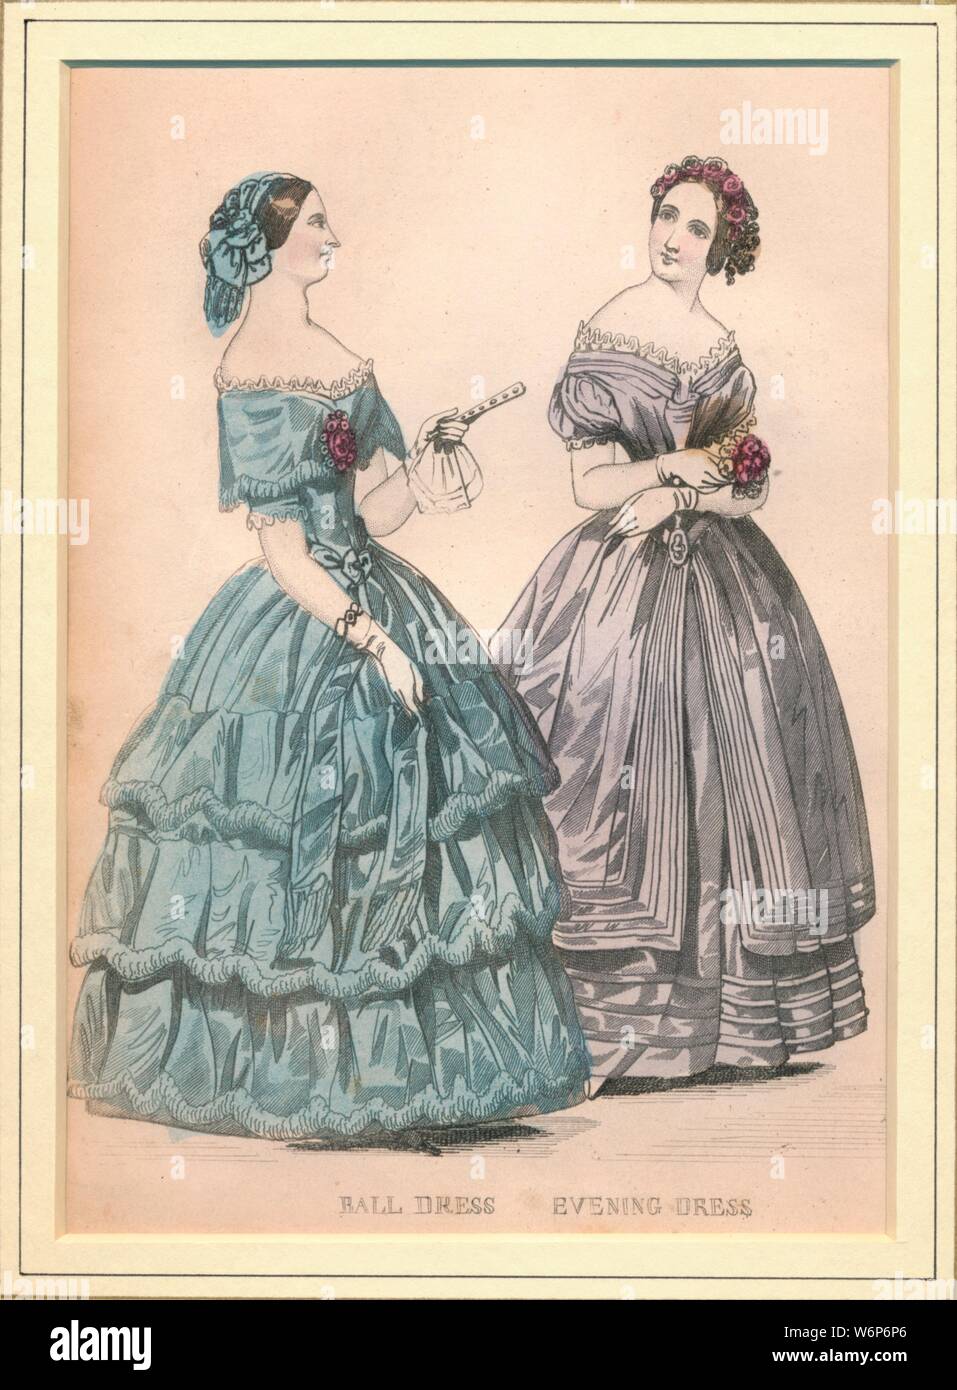 Ball Dress & Evening Dress', 19th century. Evening dress worn to a ball  or a formal event, usuually cut off the shoulder with low decolletage,  exposed arms, and long styled skirts Stock